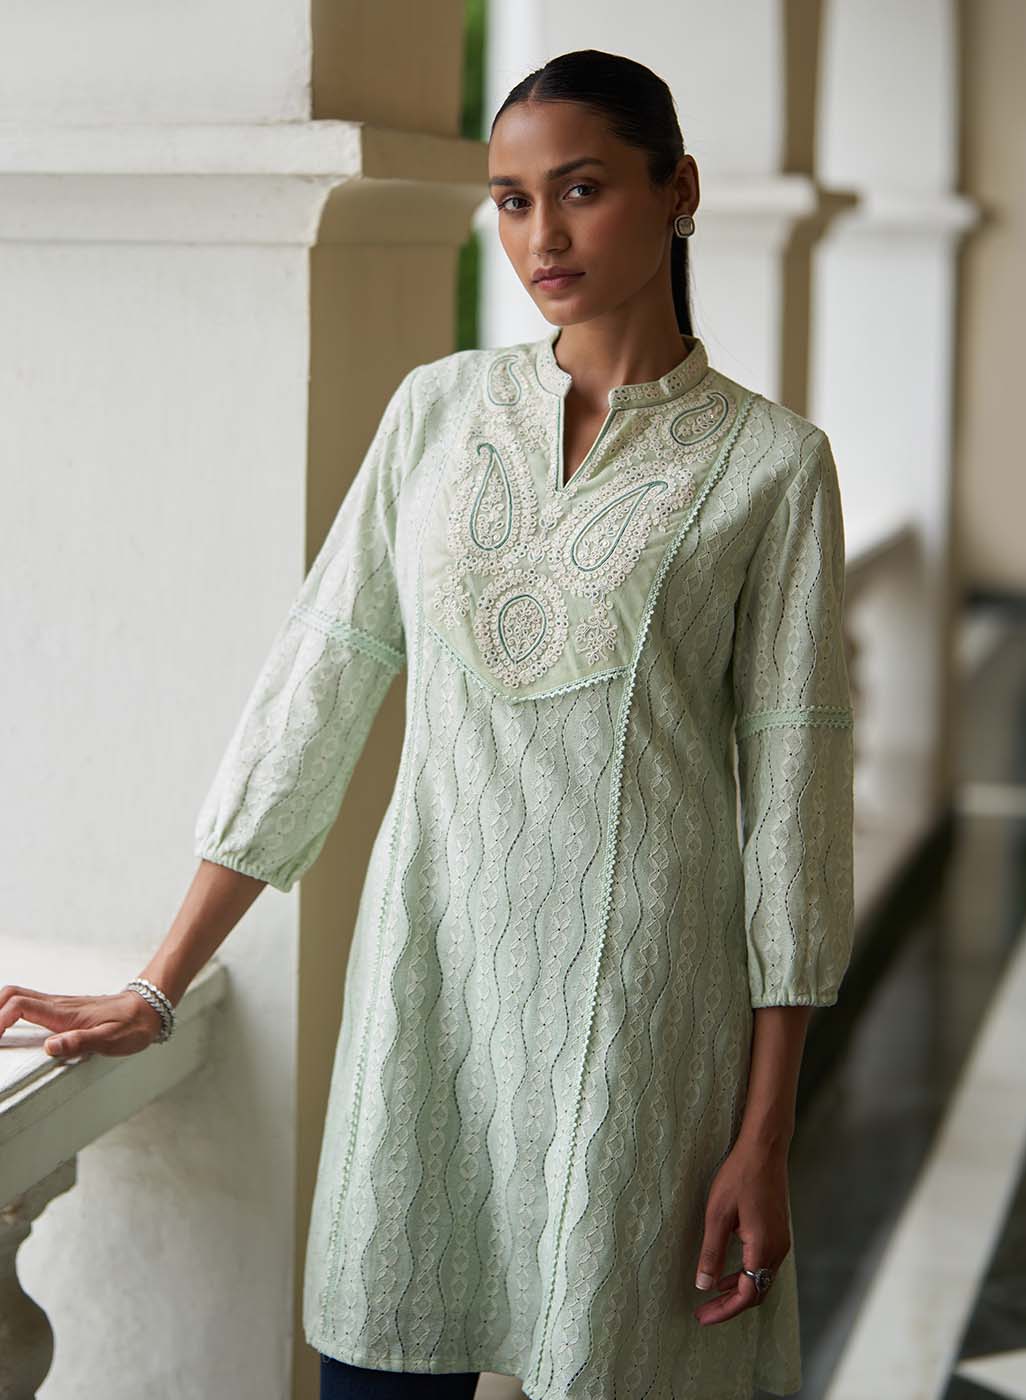 Trendy and Fashionable Collar Neck Design for Kurti - Hunar Online